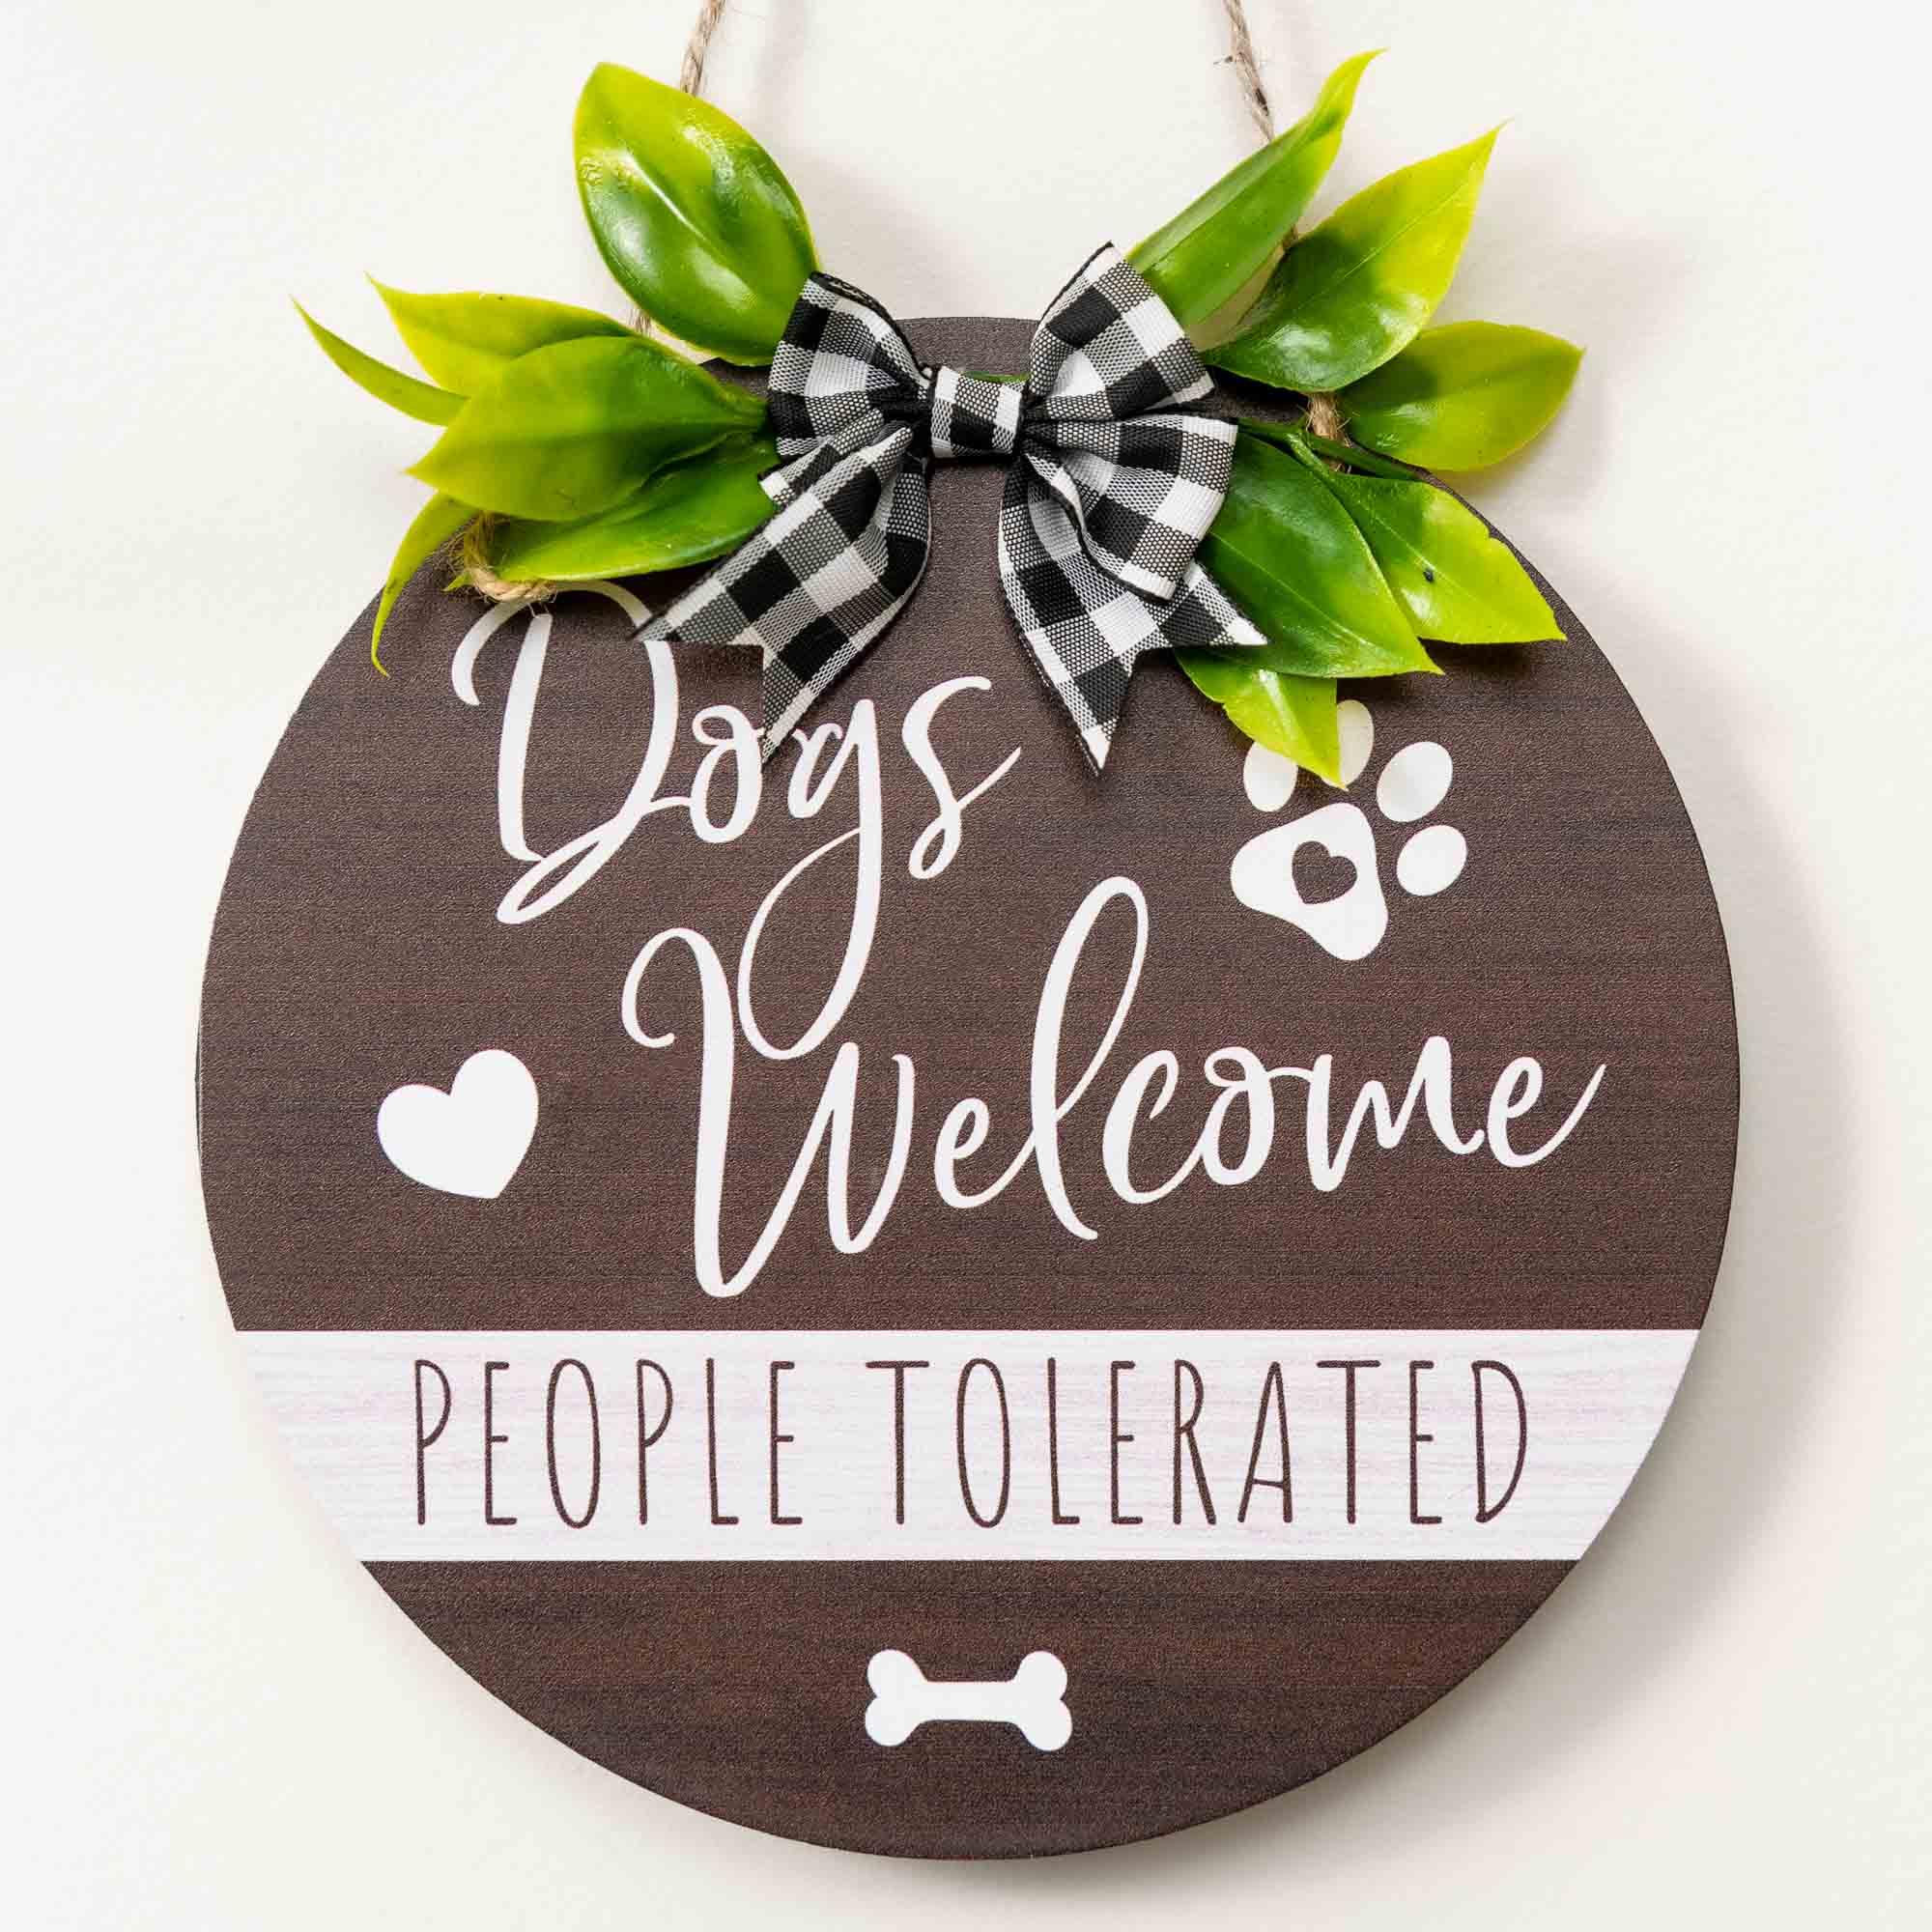 iHeartDogs Dogs Welcome People Tolerated – Home Decor Hanging Sign for Dog Lovers